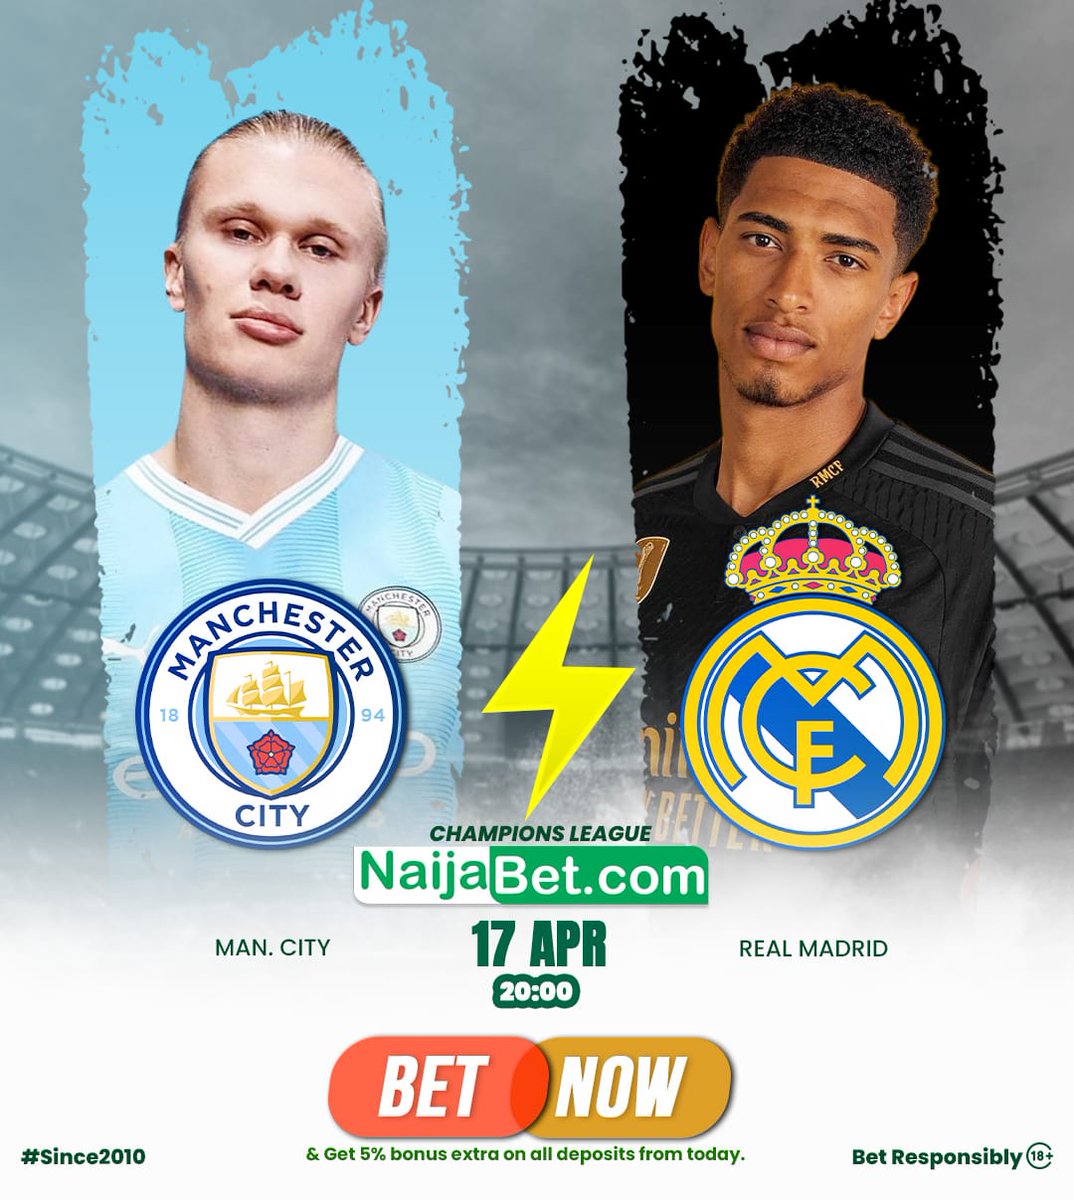 🏴󠁧󠁢󠁥󠁮󠁧󠁿 Man City vs Real Madrid 🇪🇦 ⏰ 20:00 #UCL The reigning champions welcome the record winners to the Etihad Stadium, with both sides bidding to reach the last four of the competition. 🔥Can The Record Winners Make A Statement At The Etihad Stadium ? 🔵⚪ @ManCity ➡️ 1.65 ODDS…